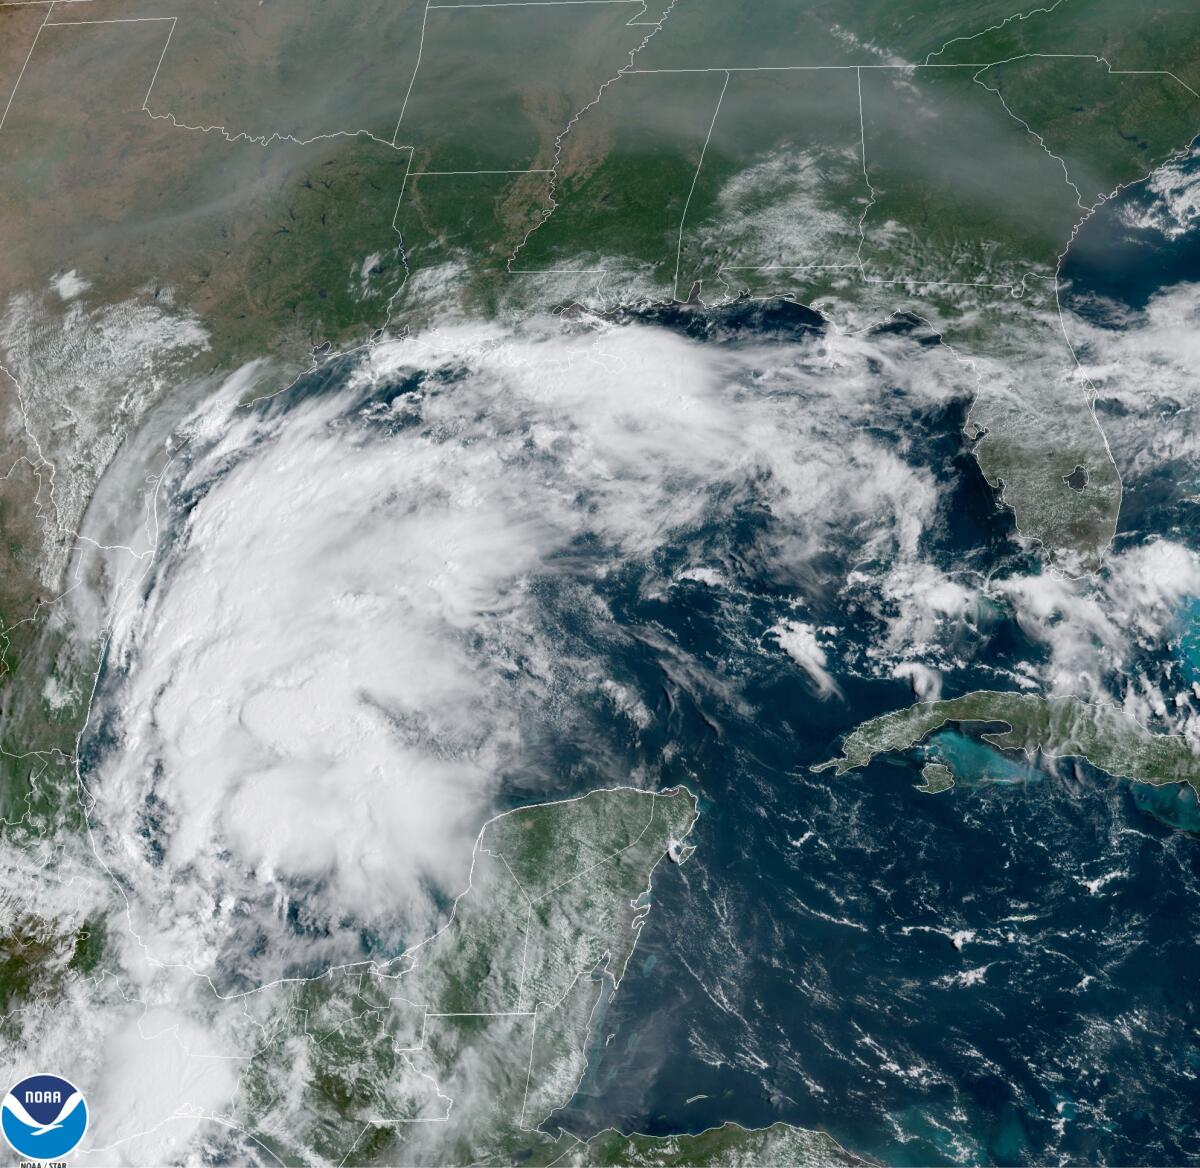 A satellite image showing Tropical Storm Nicholas swirling in the Gulf of Mexico.